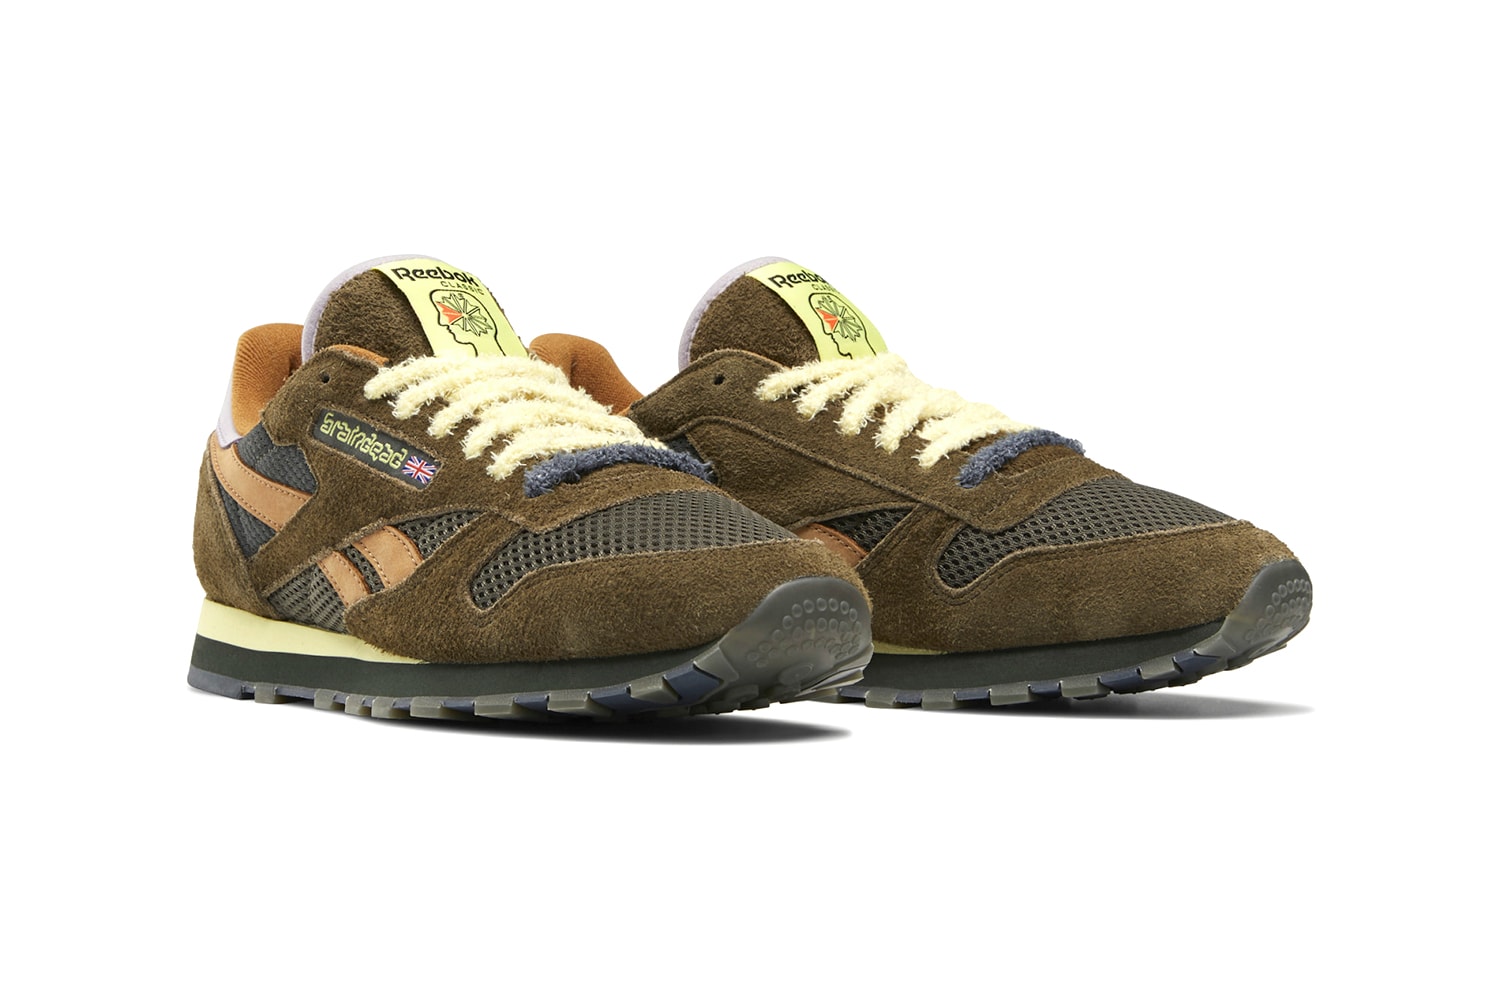 Brain Dead x Reebok Classic Leather Official Images release details info suede brown MOSS / SOFT CAMEL / FILTERED YELLOW FY0832